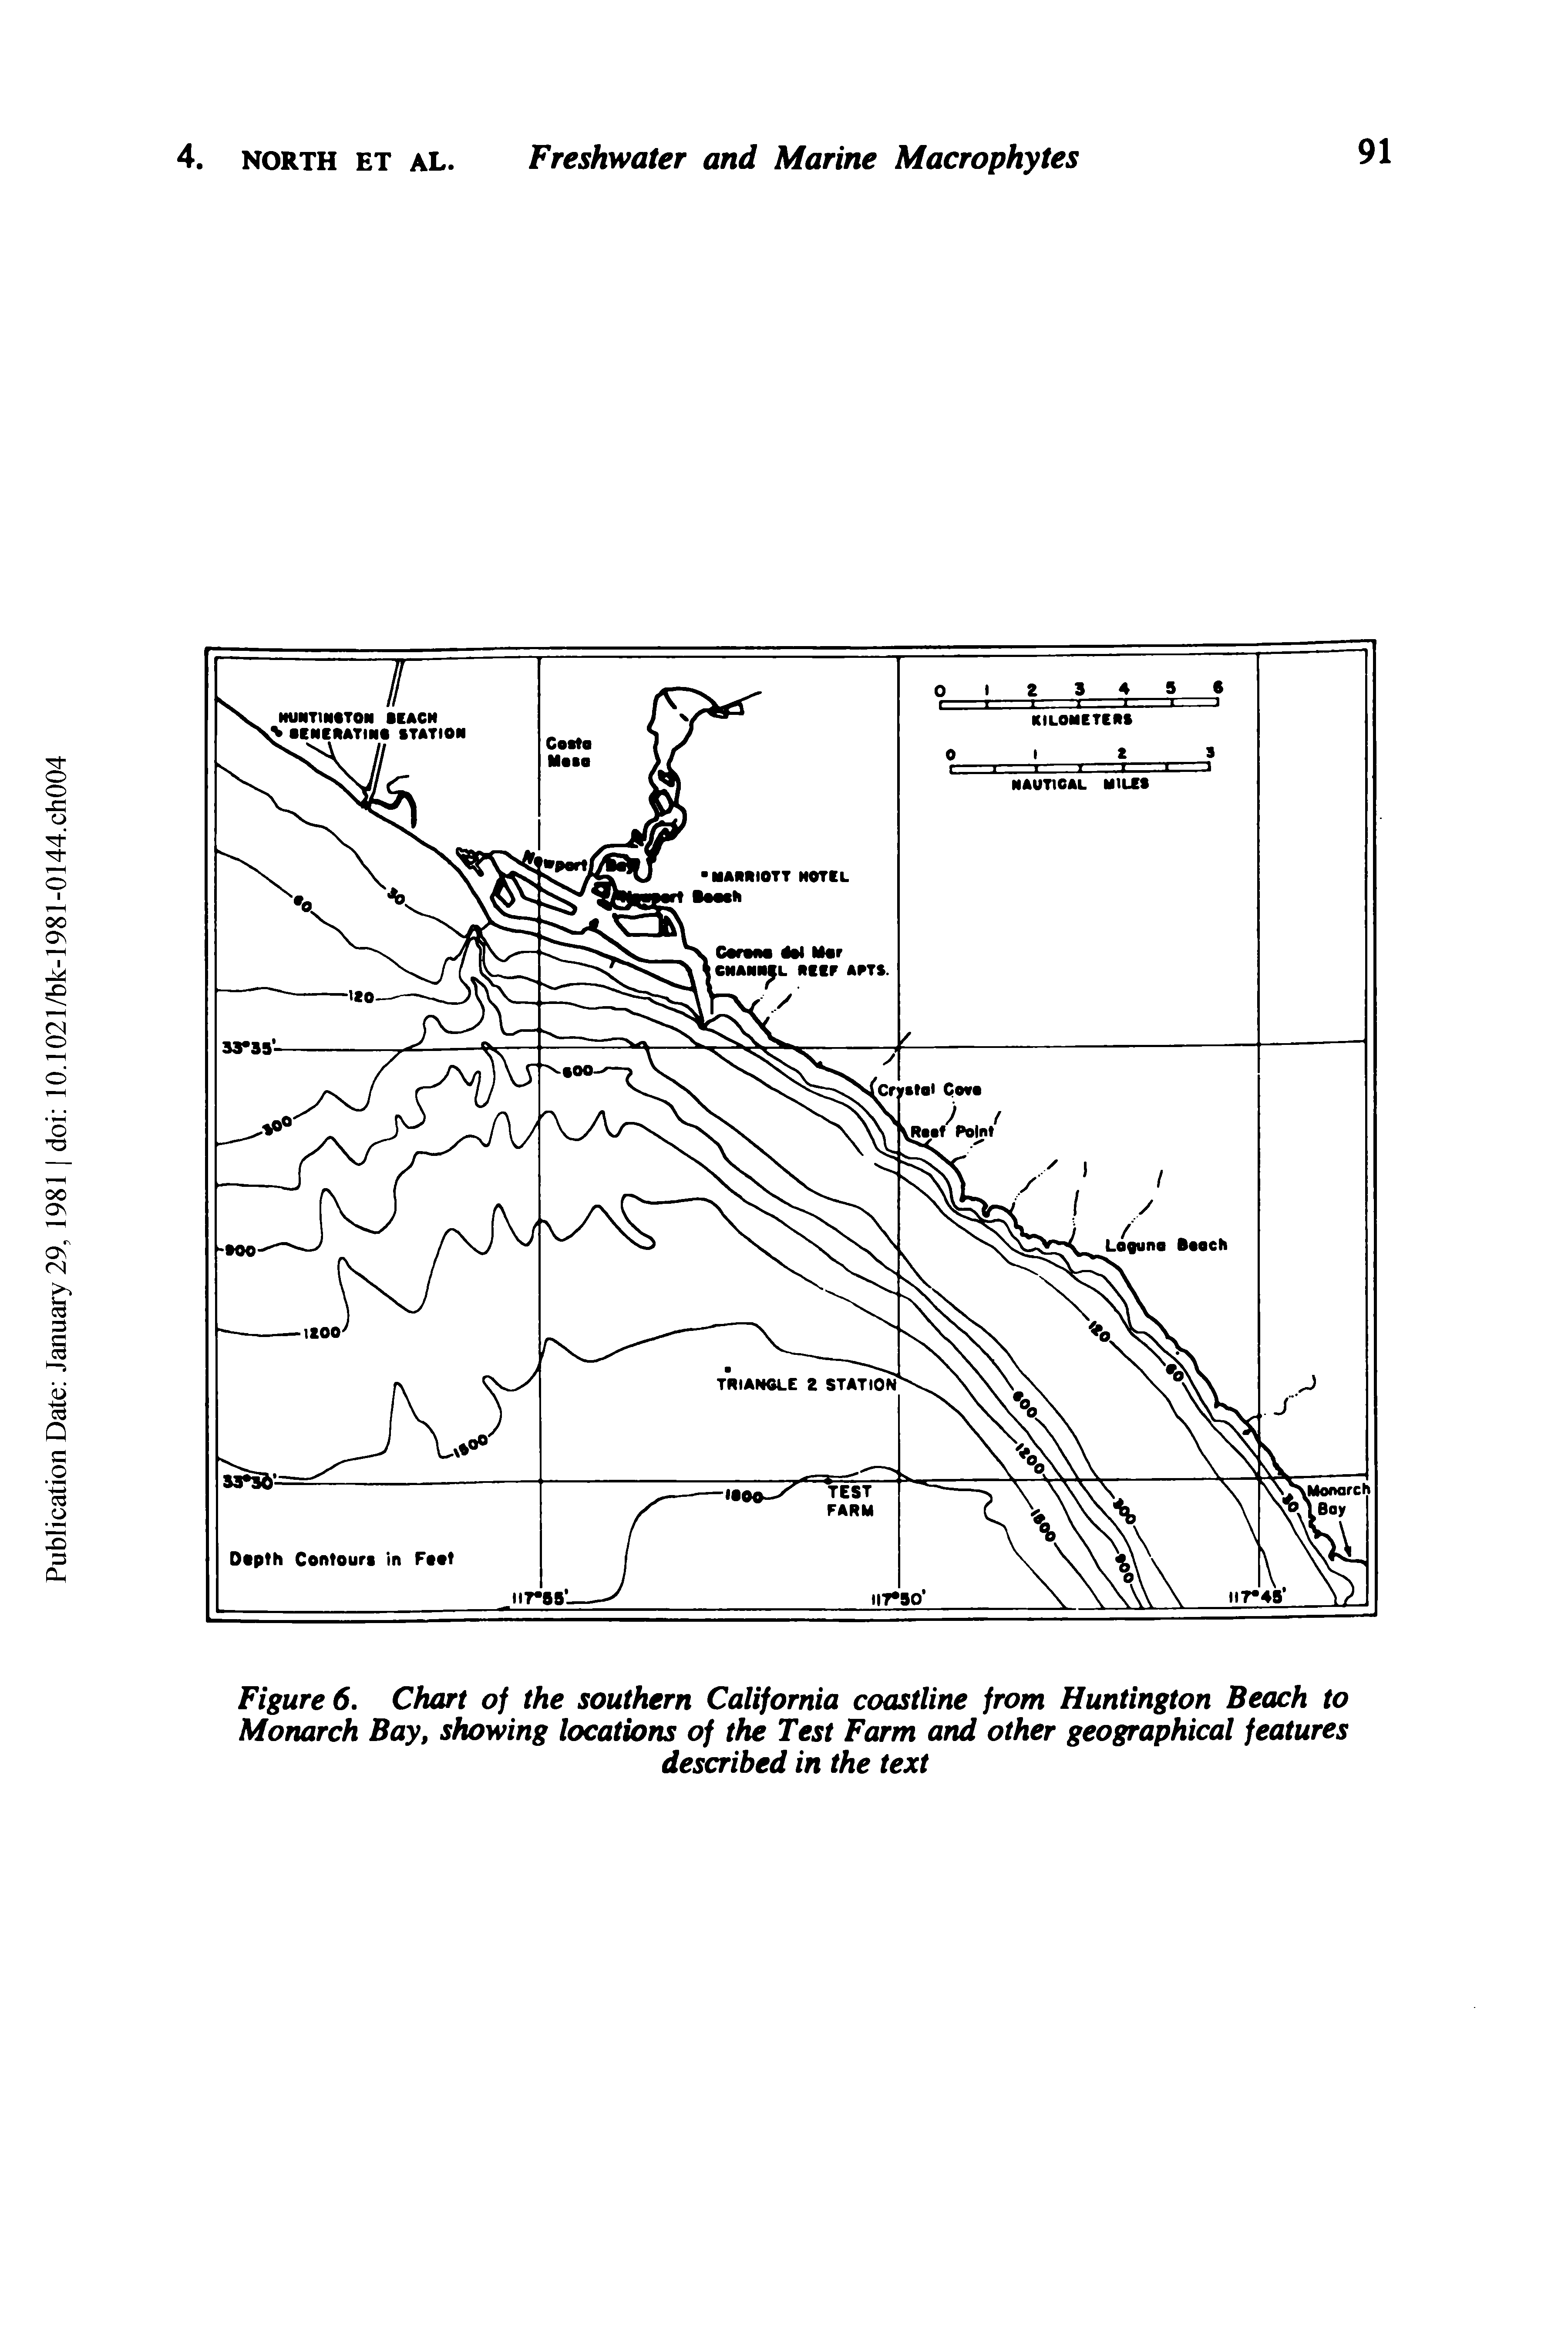 Figure 6, Chart of the southern California coastline from Huntington Beach to Monarch Bay, showing locations of the Test Farm and other geographical features...